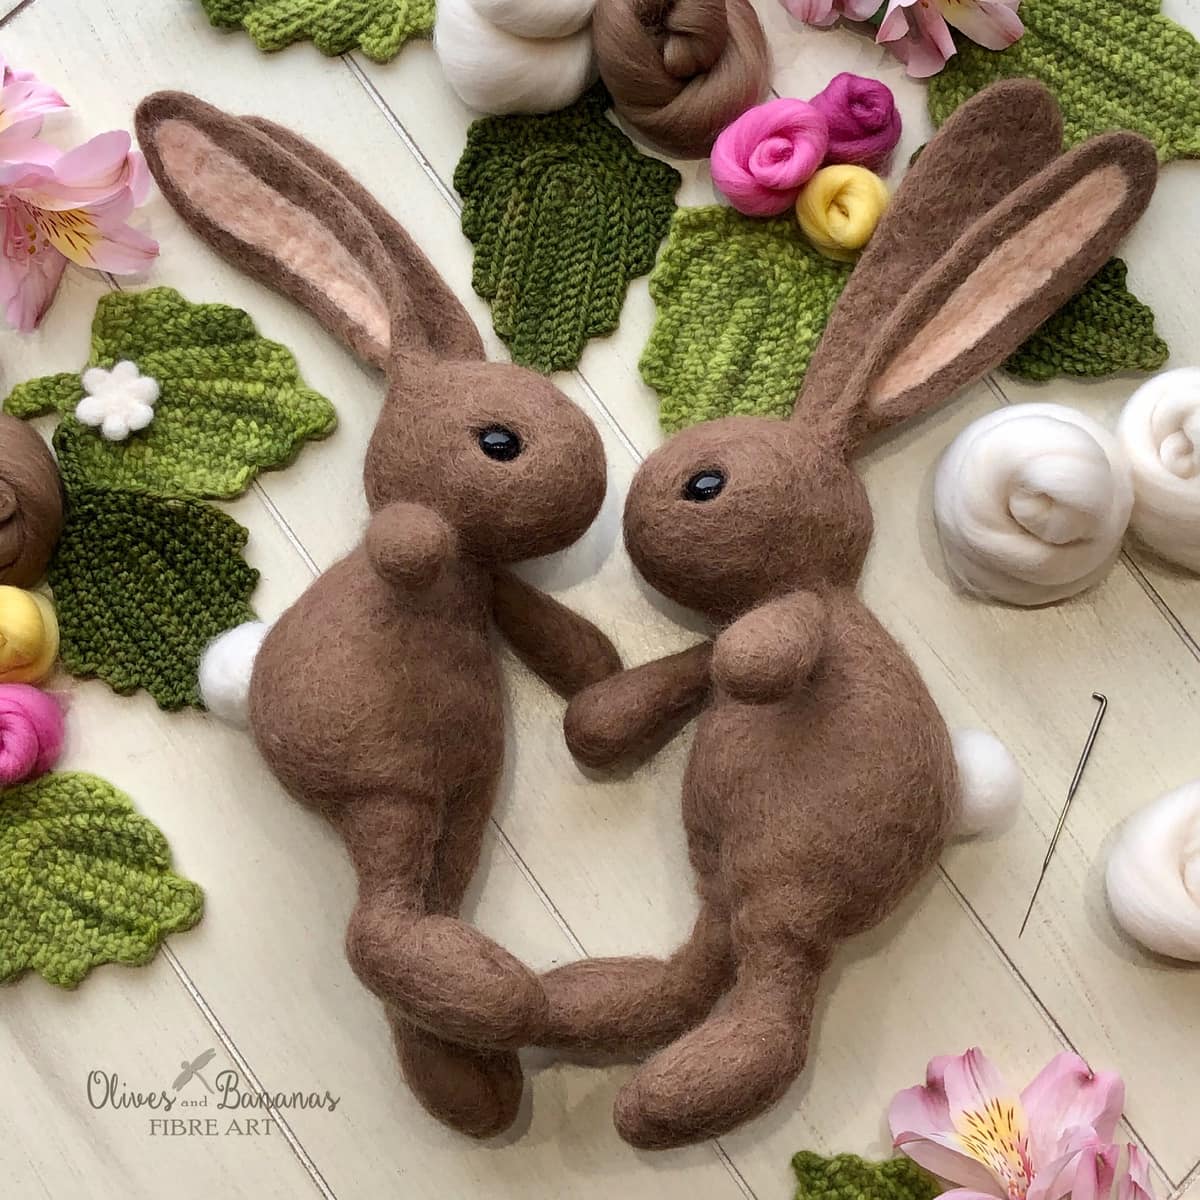 image description: two rabbit toys made from wool felt